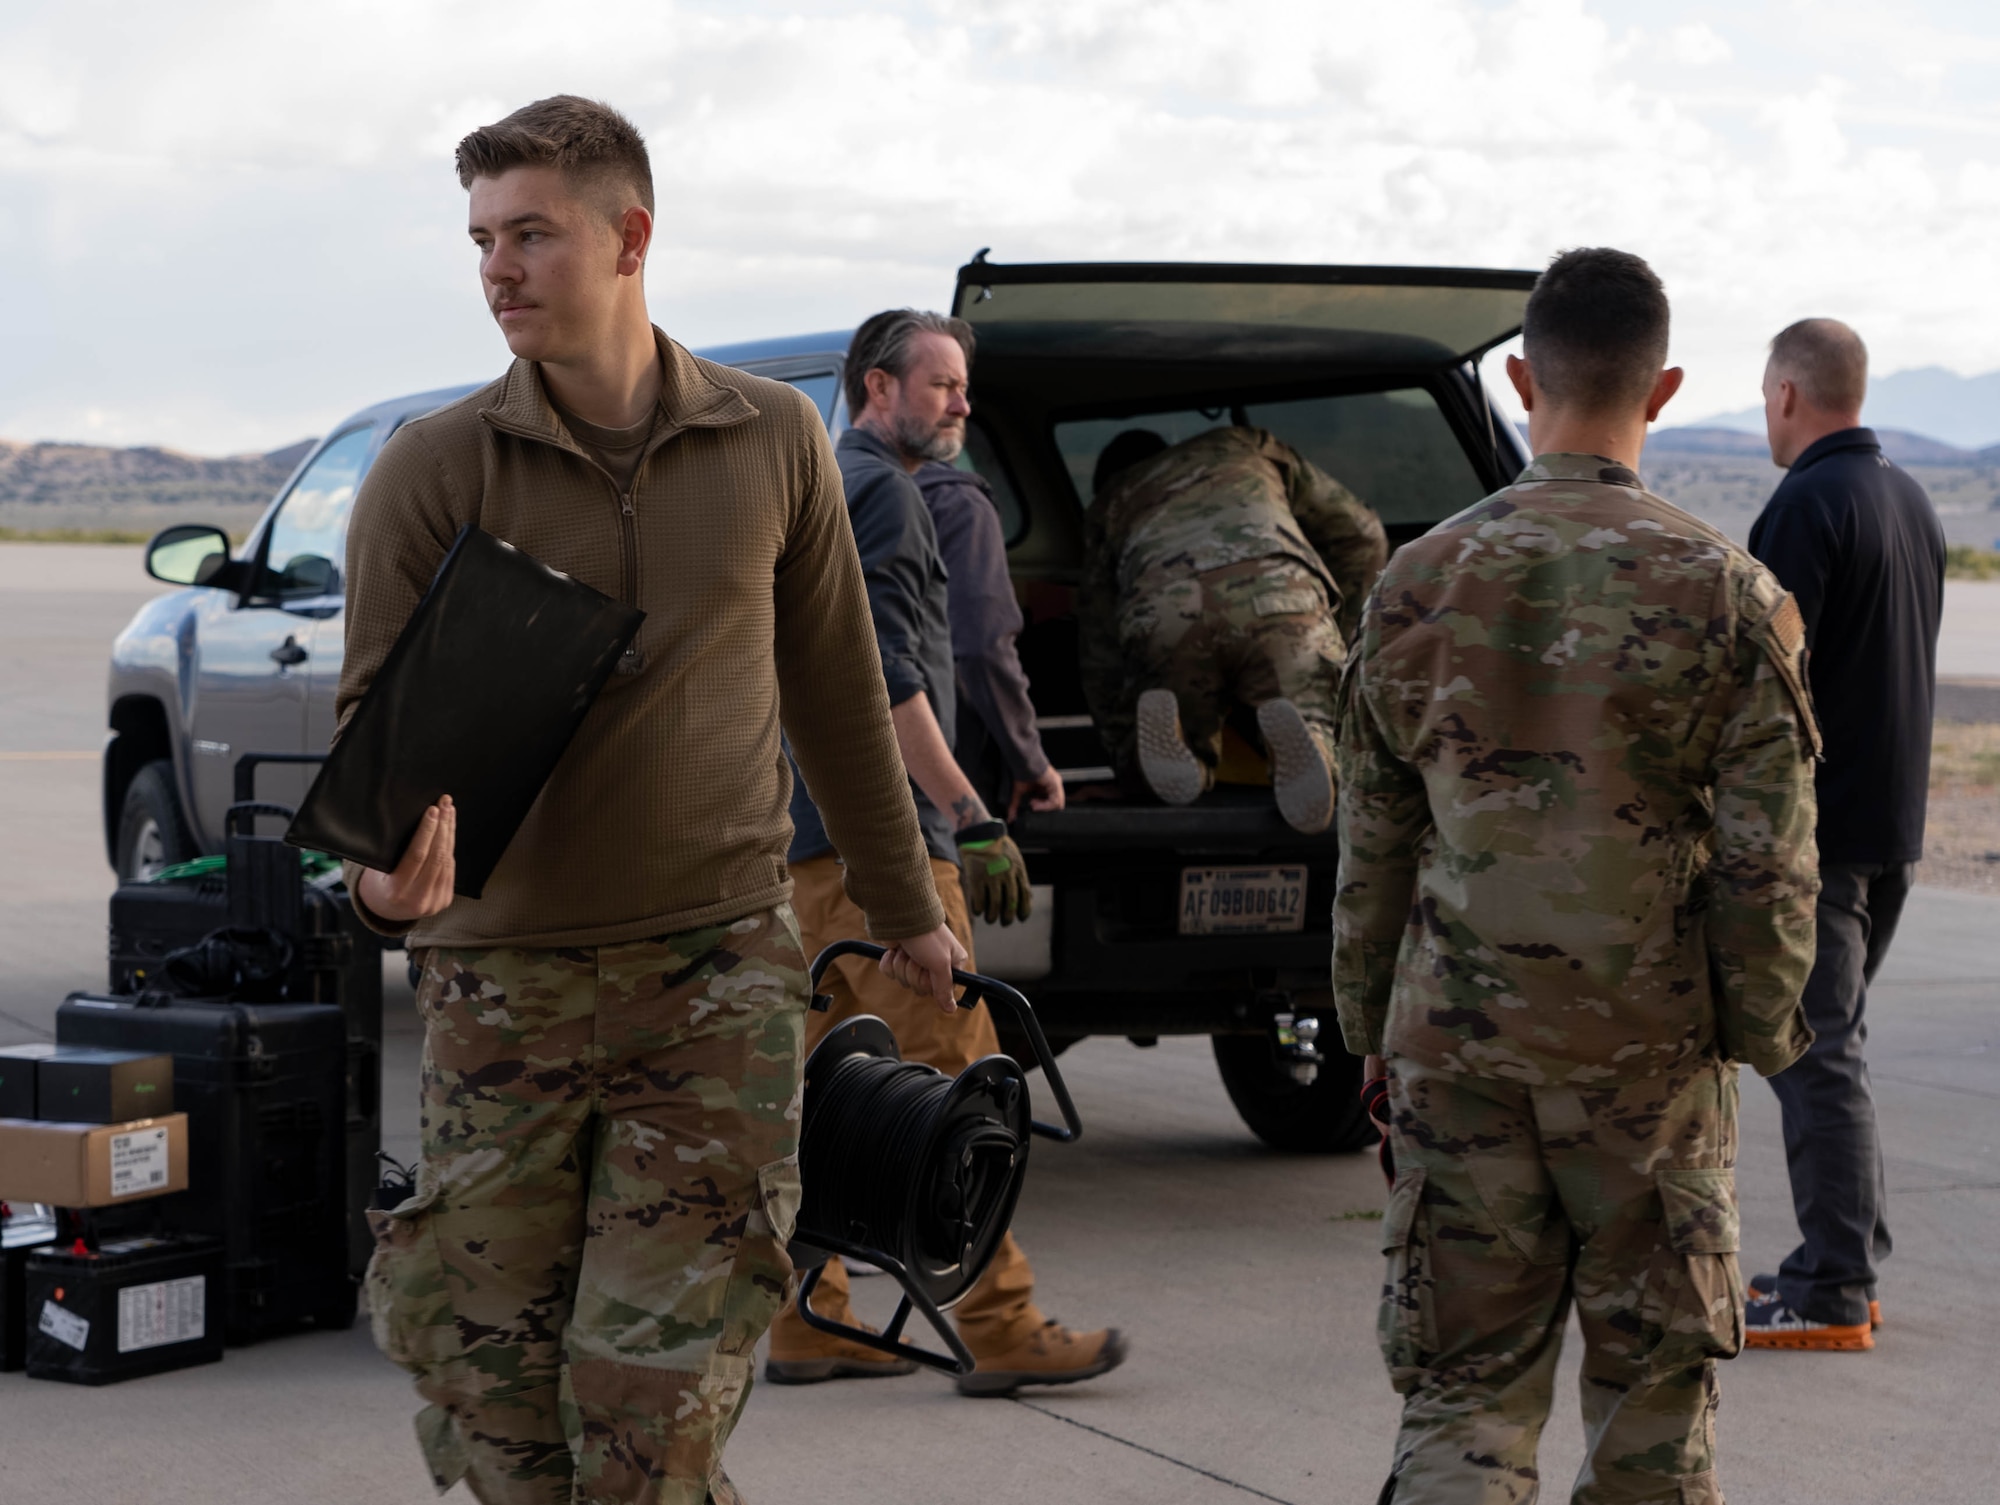 Airman unloading equipment from a pickup